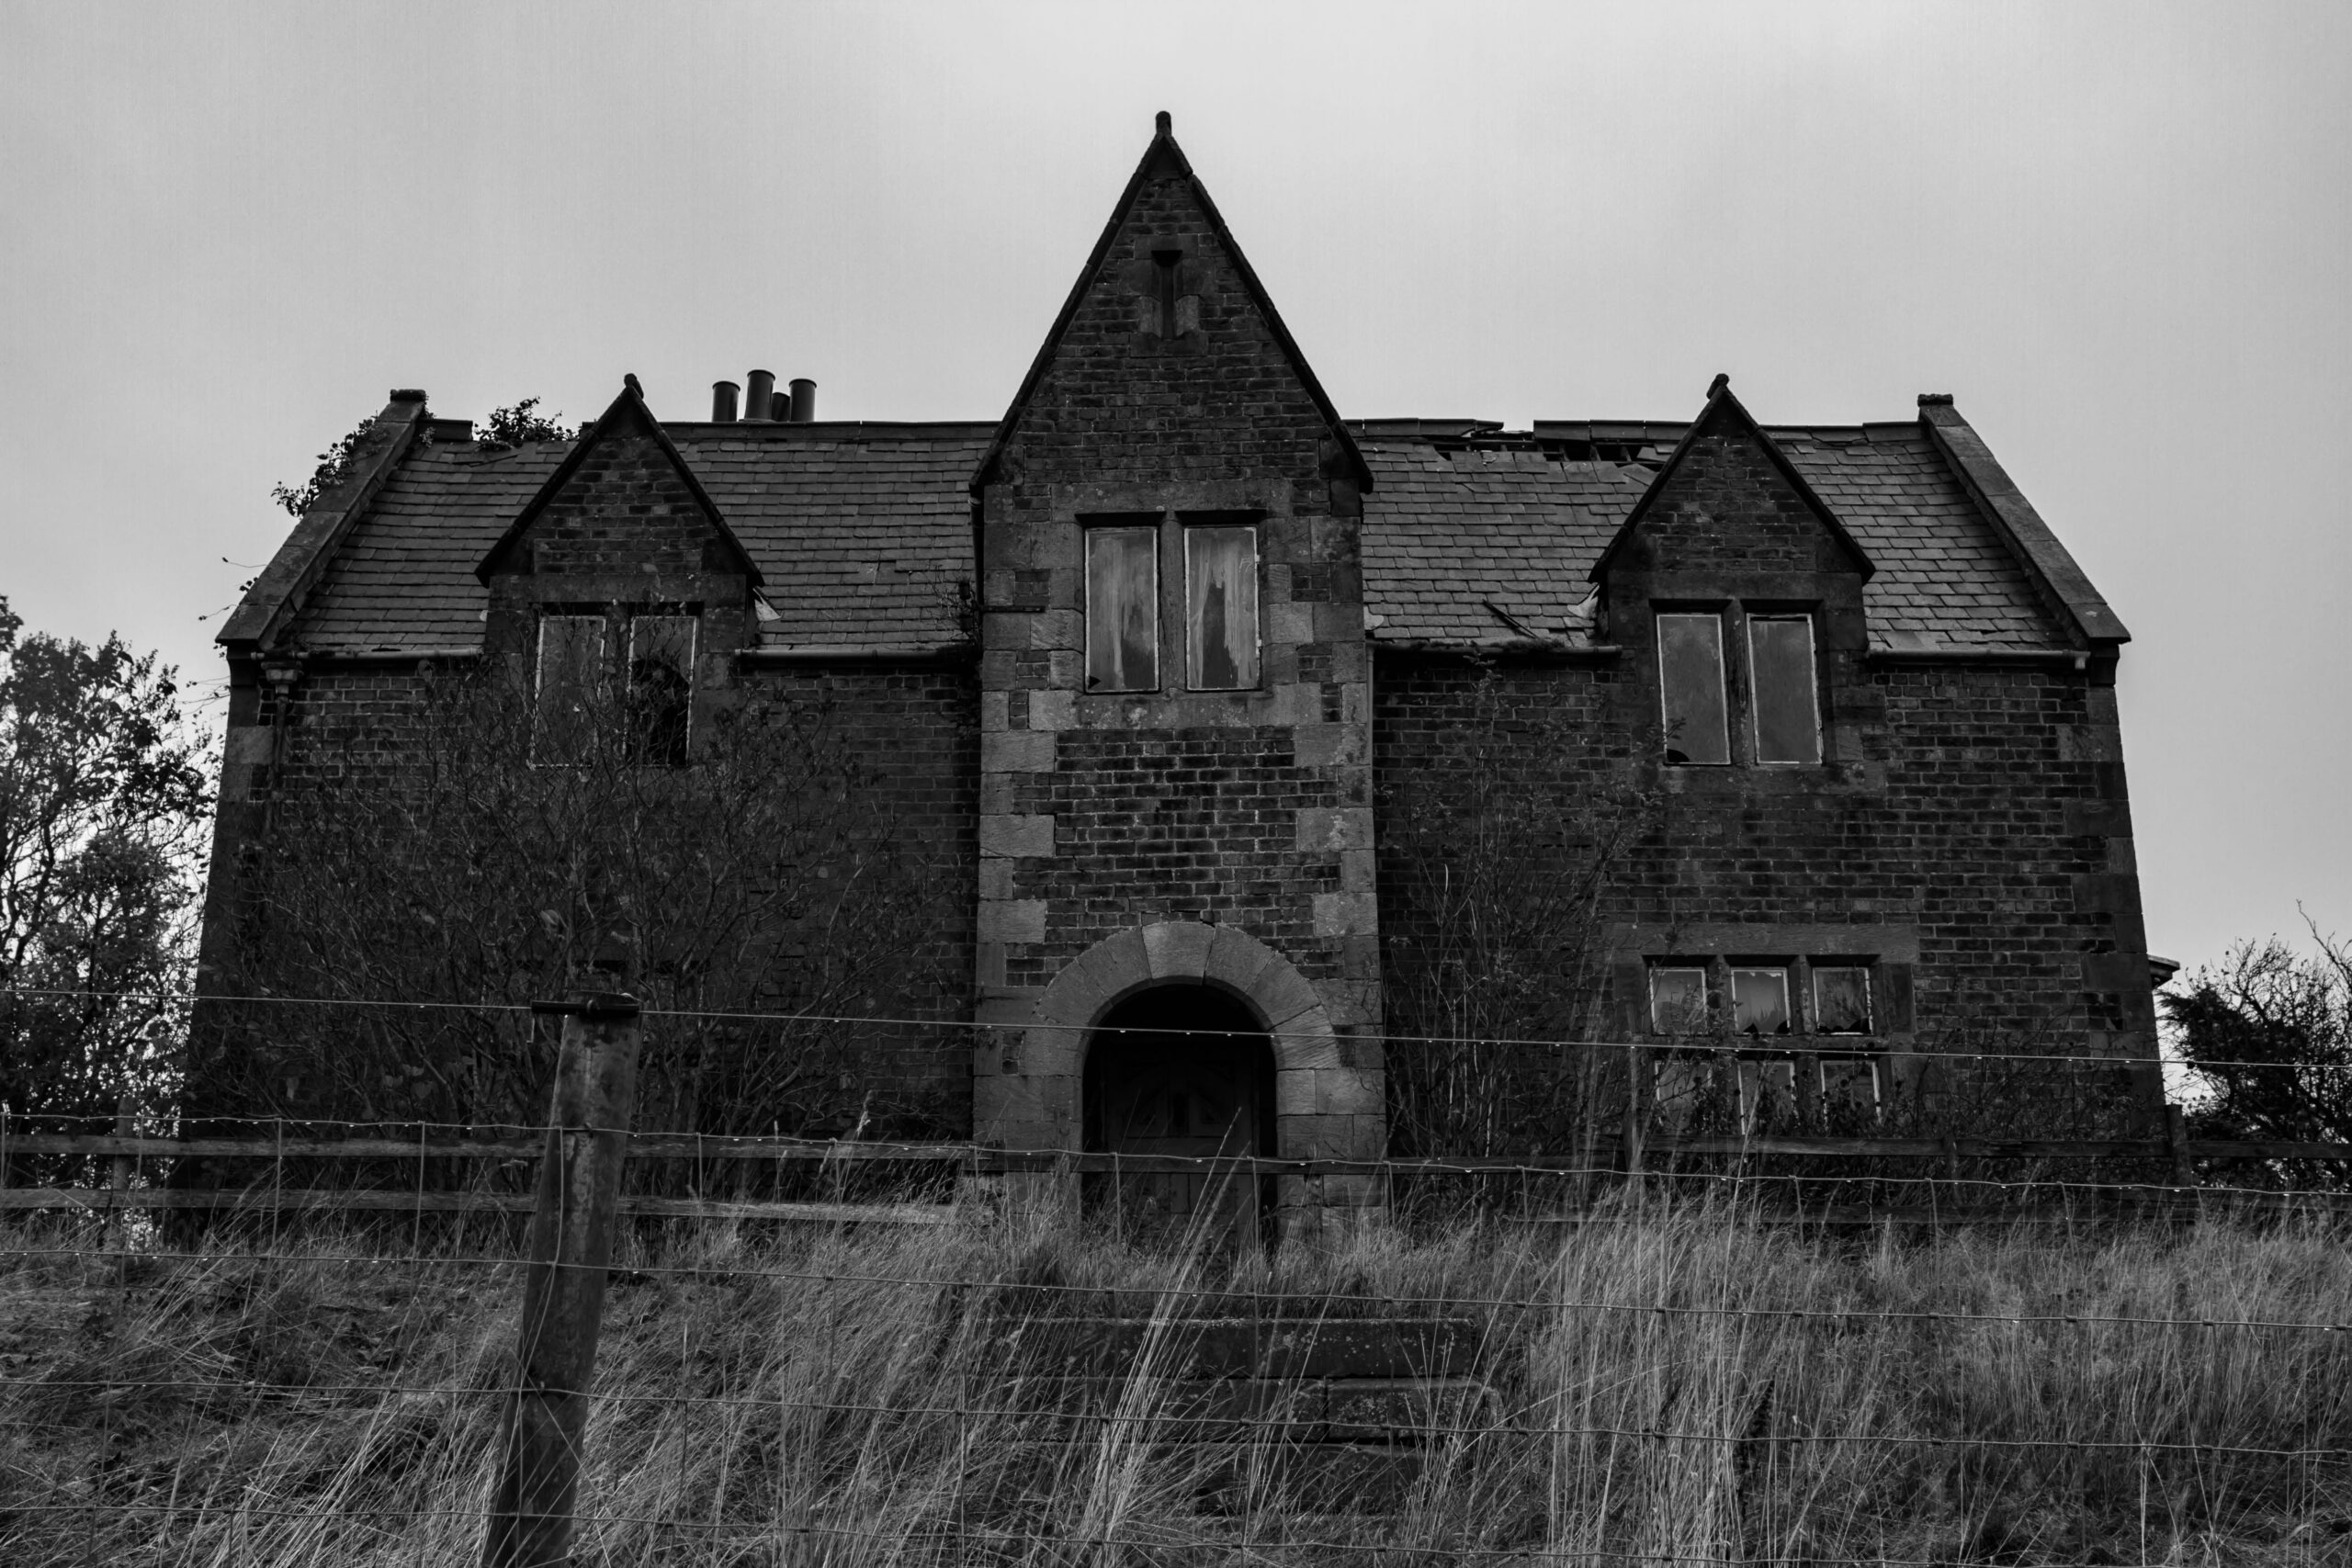 The Financial Impact of Paranormal Tourism on Local Communities